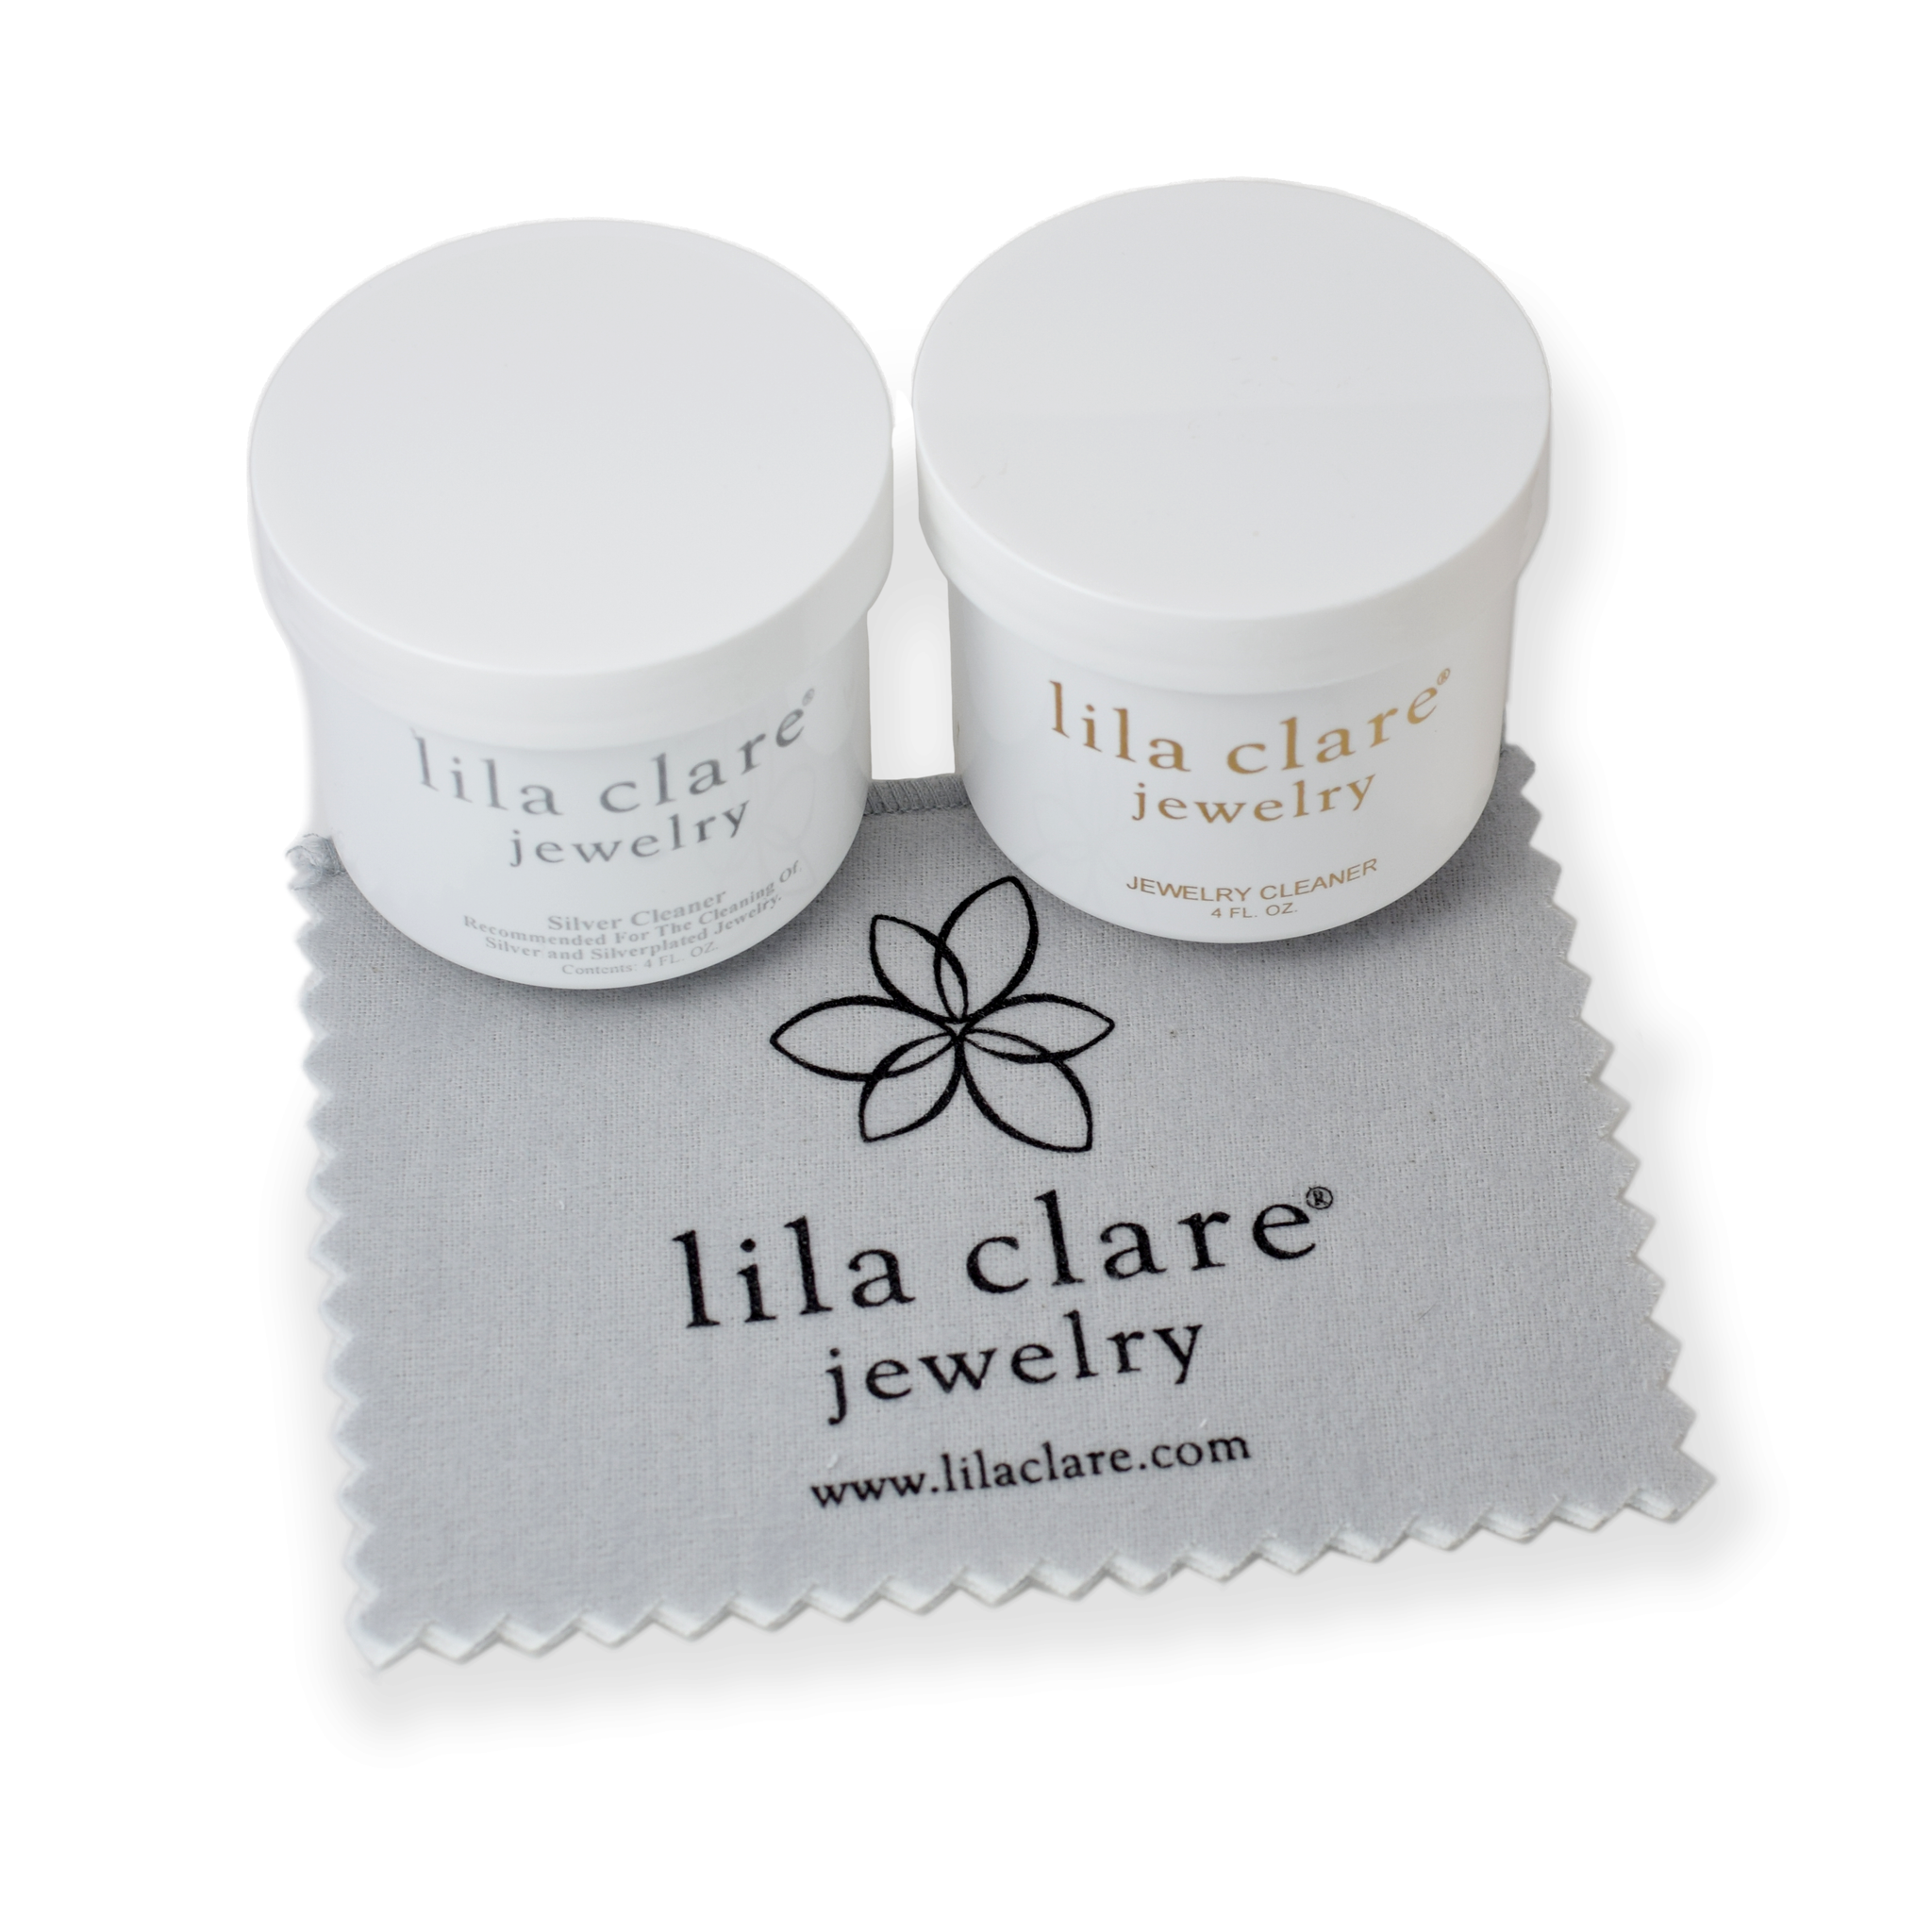 Sterling Silver Jewelry Cleaner - Lila Clare